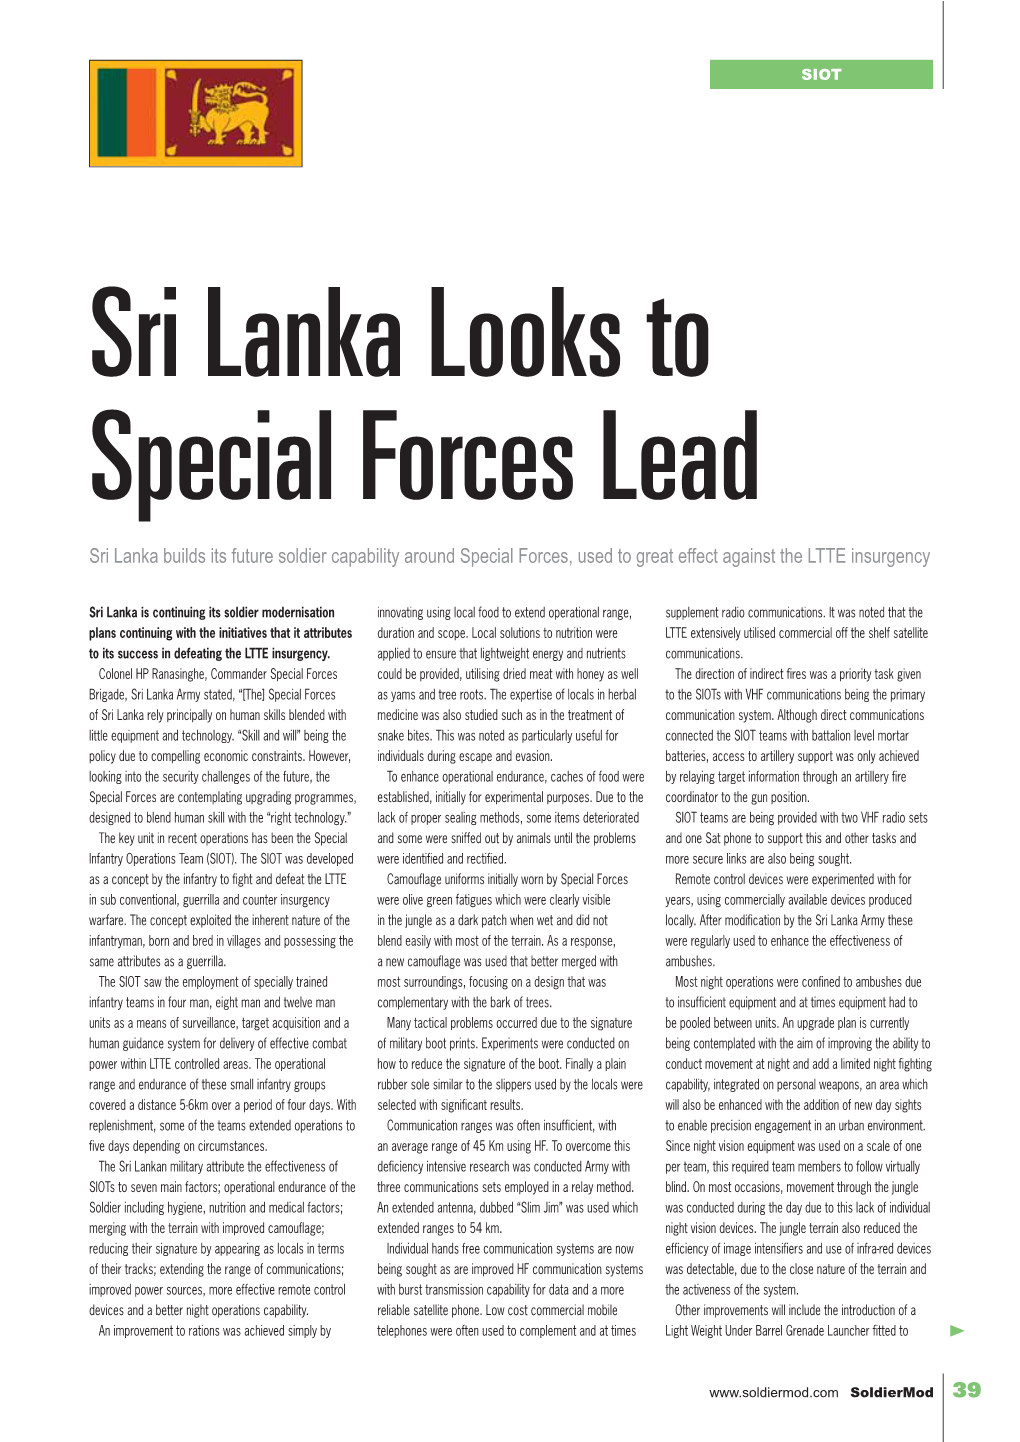 Sri Lanka Builds Its Future Soldier Capability Around Special Forces, Used to Great Effect Against the LTTE Insurgency